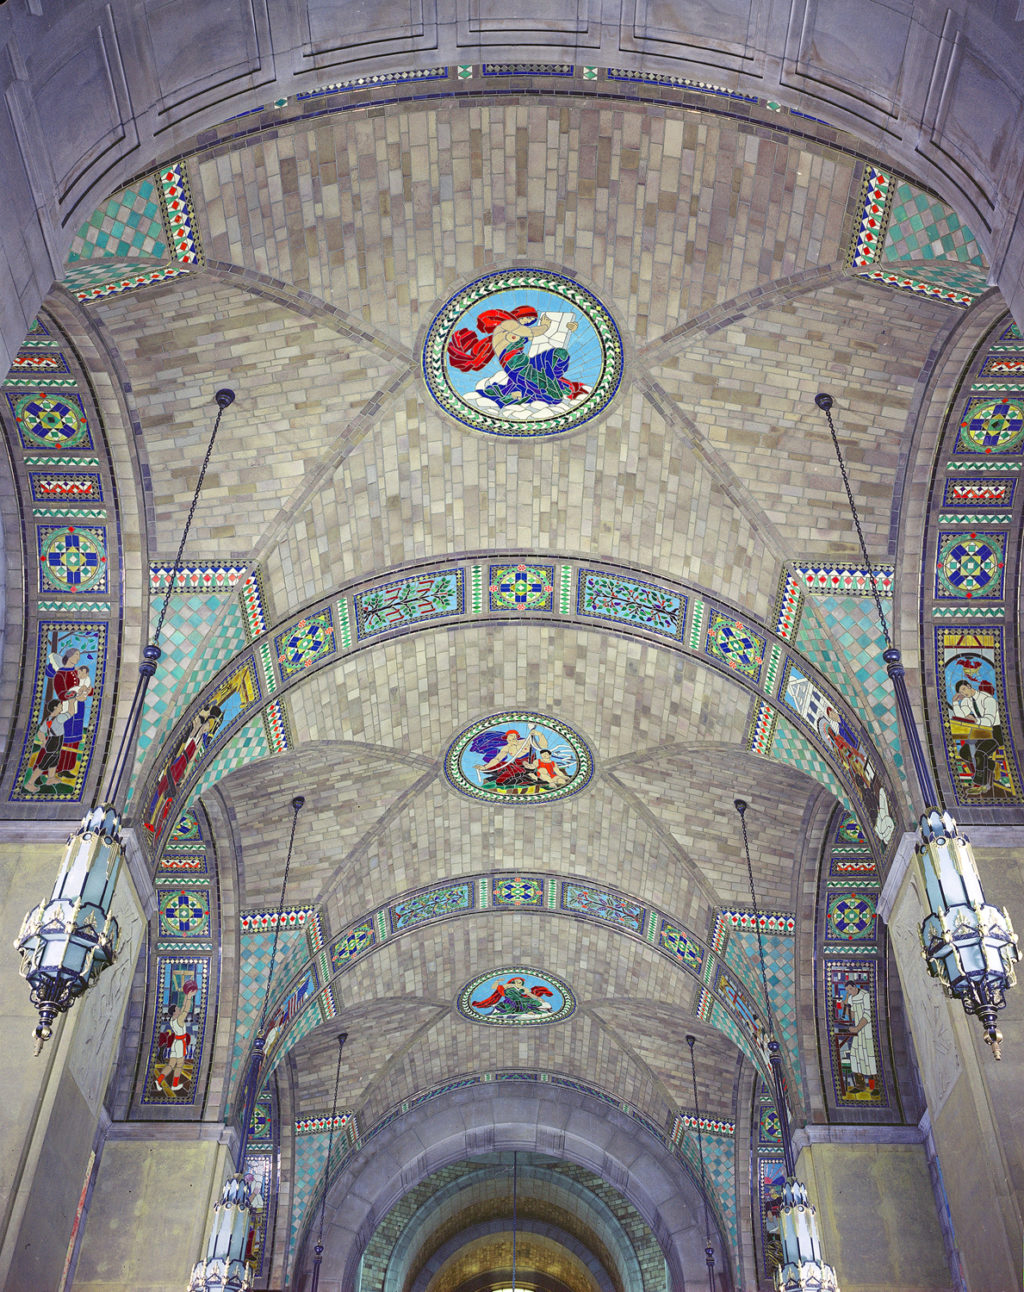 The foyer ceiling with mosaics of the activities of society.